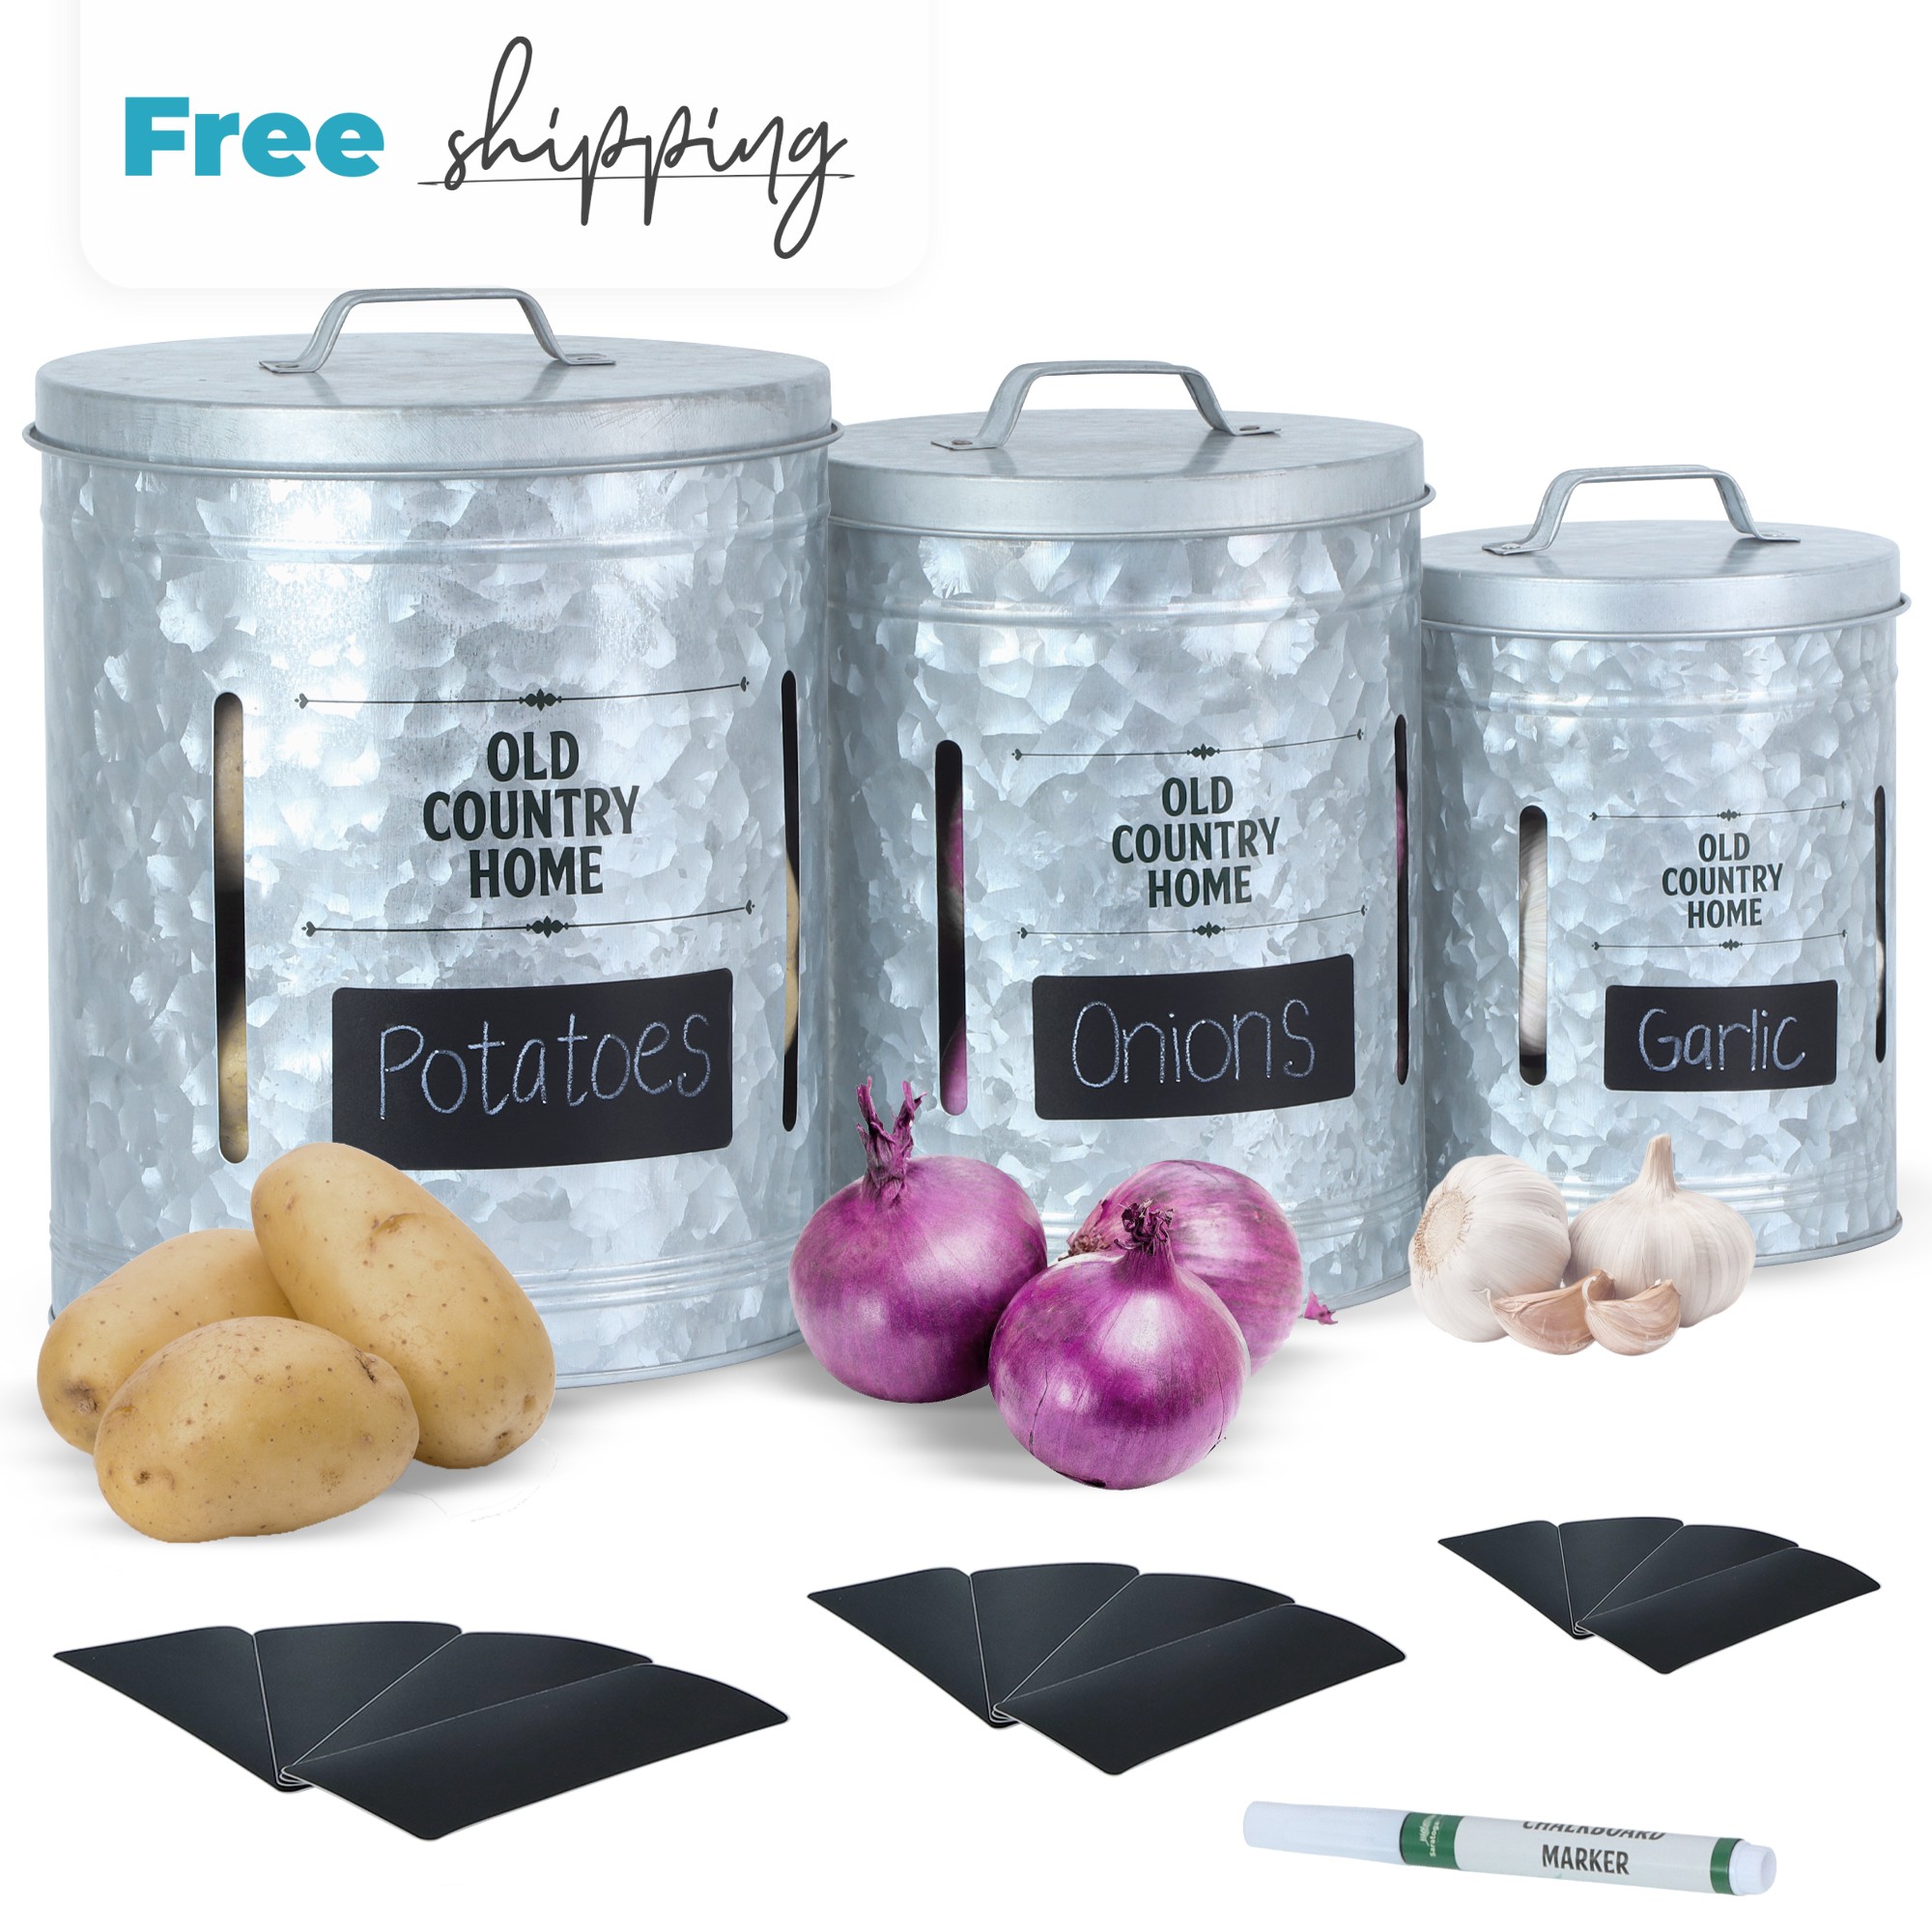 Large Galvanized Veggie Canisters with labels and marker